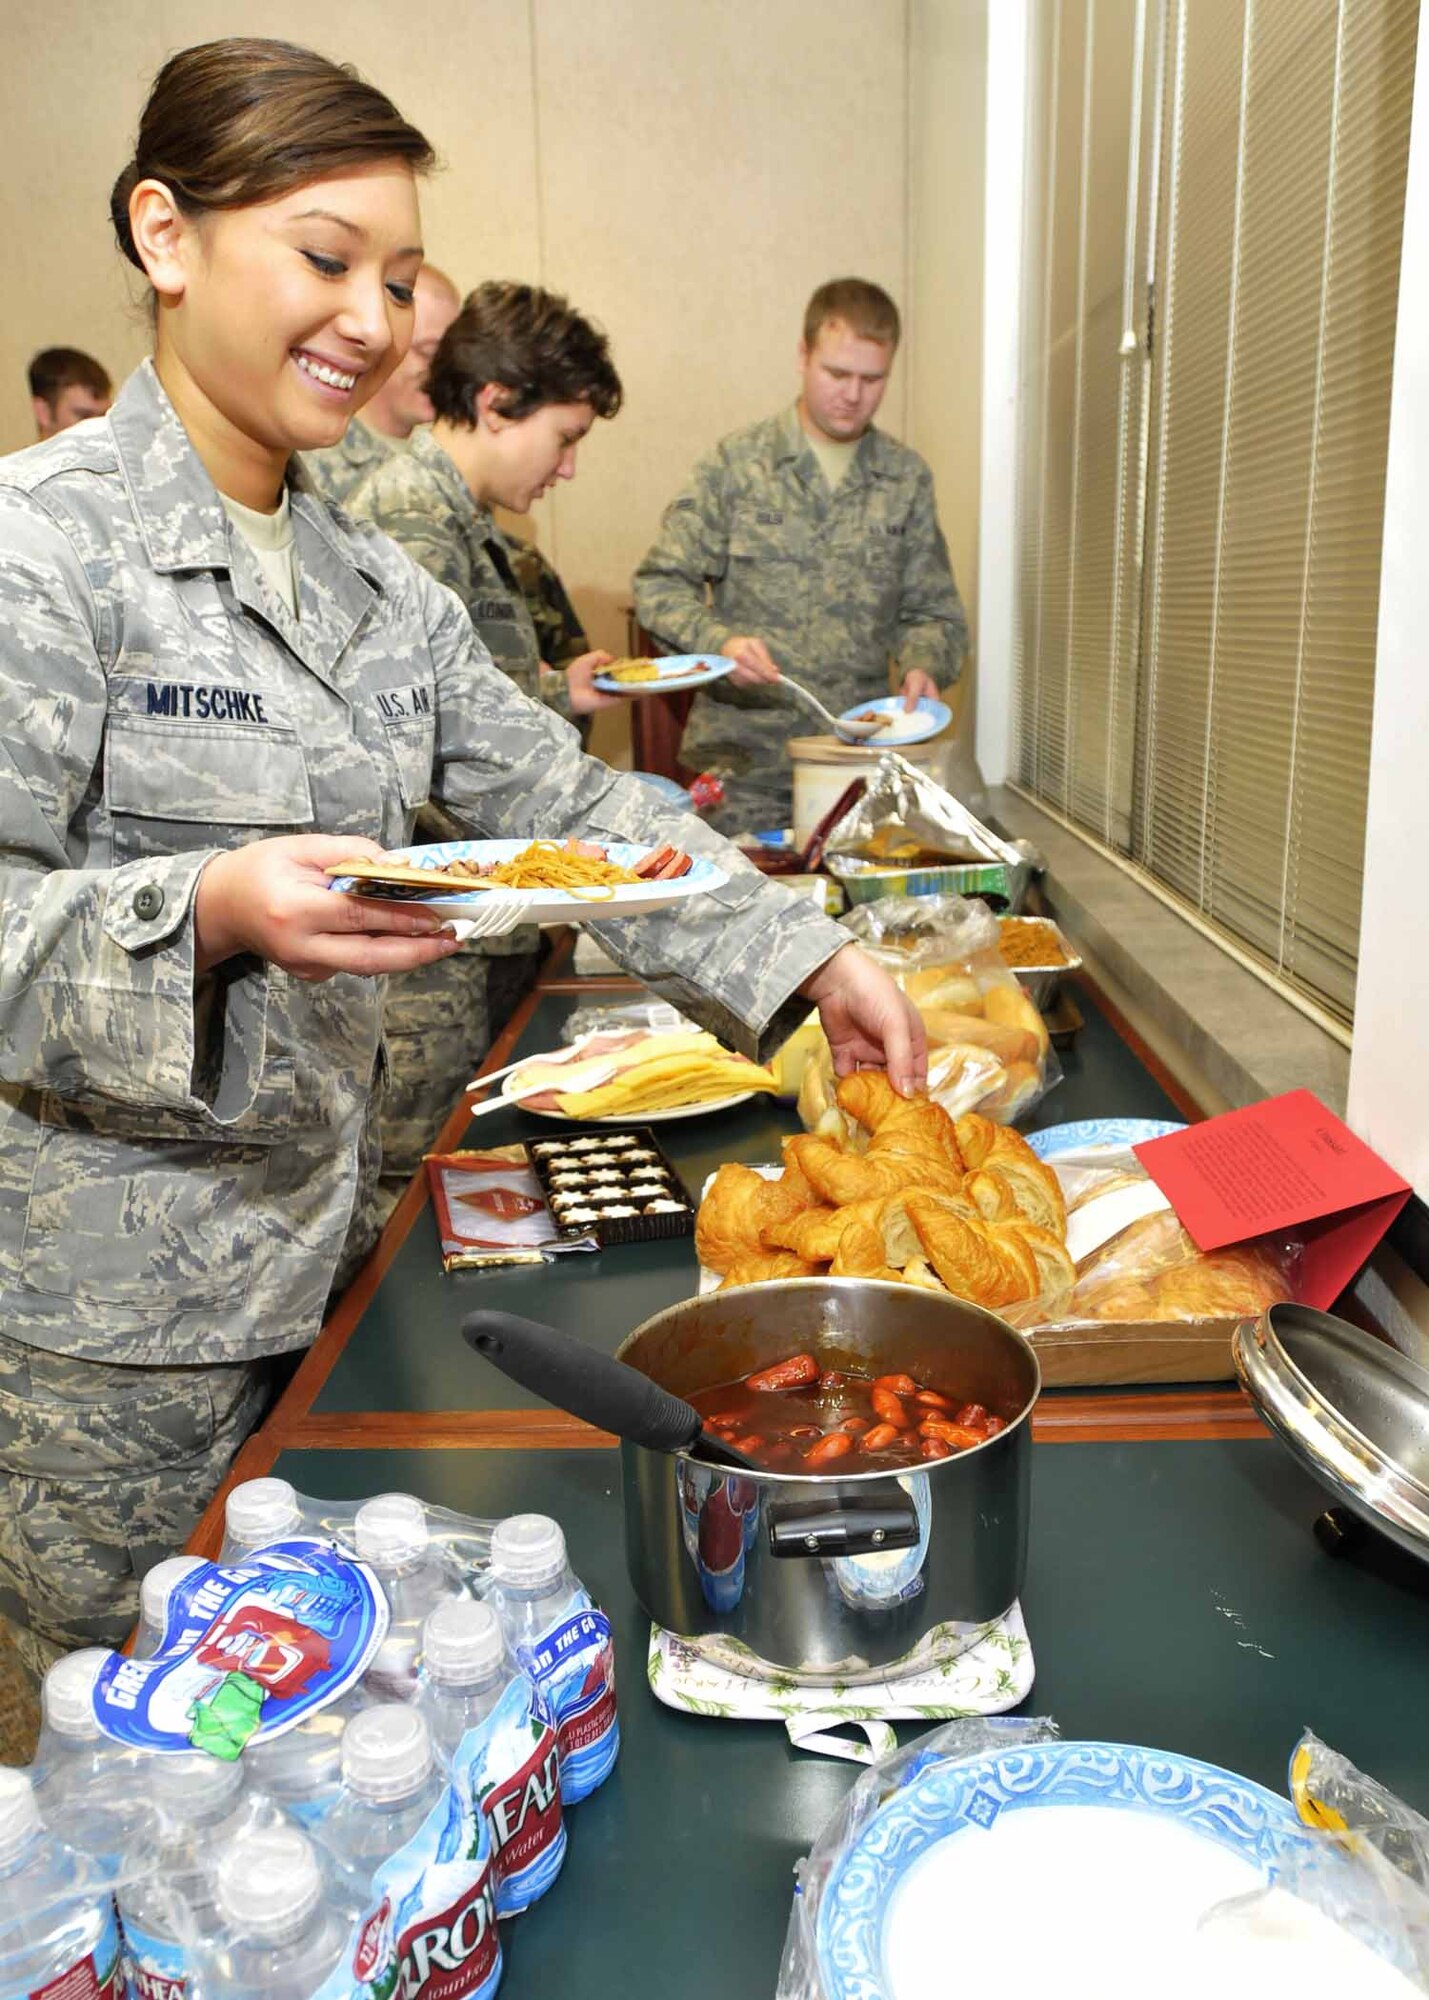 Airman 1st Class Jhangmi Mitschke, 141st Medical Group, partakes in the Diversity Council’s ethnic luncheon. The luncheon provided members the opportunity to bring in traditional dishes and discuss their cultural significance. Fairchild AFB, Wash., Nov. 8, 2009. (U.S. Air Force photo by Staff Sgt. Anthony Ennamorato/Released)